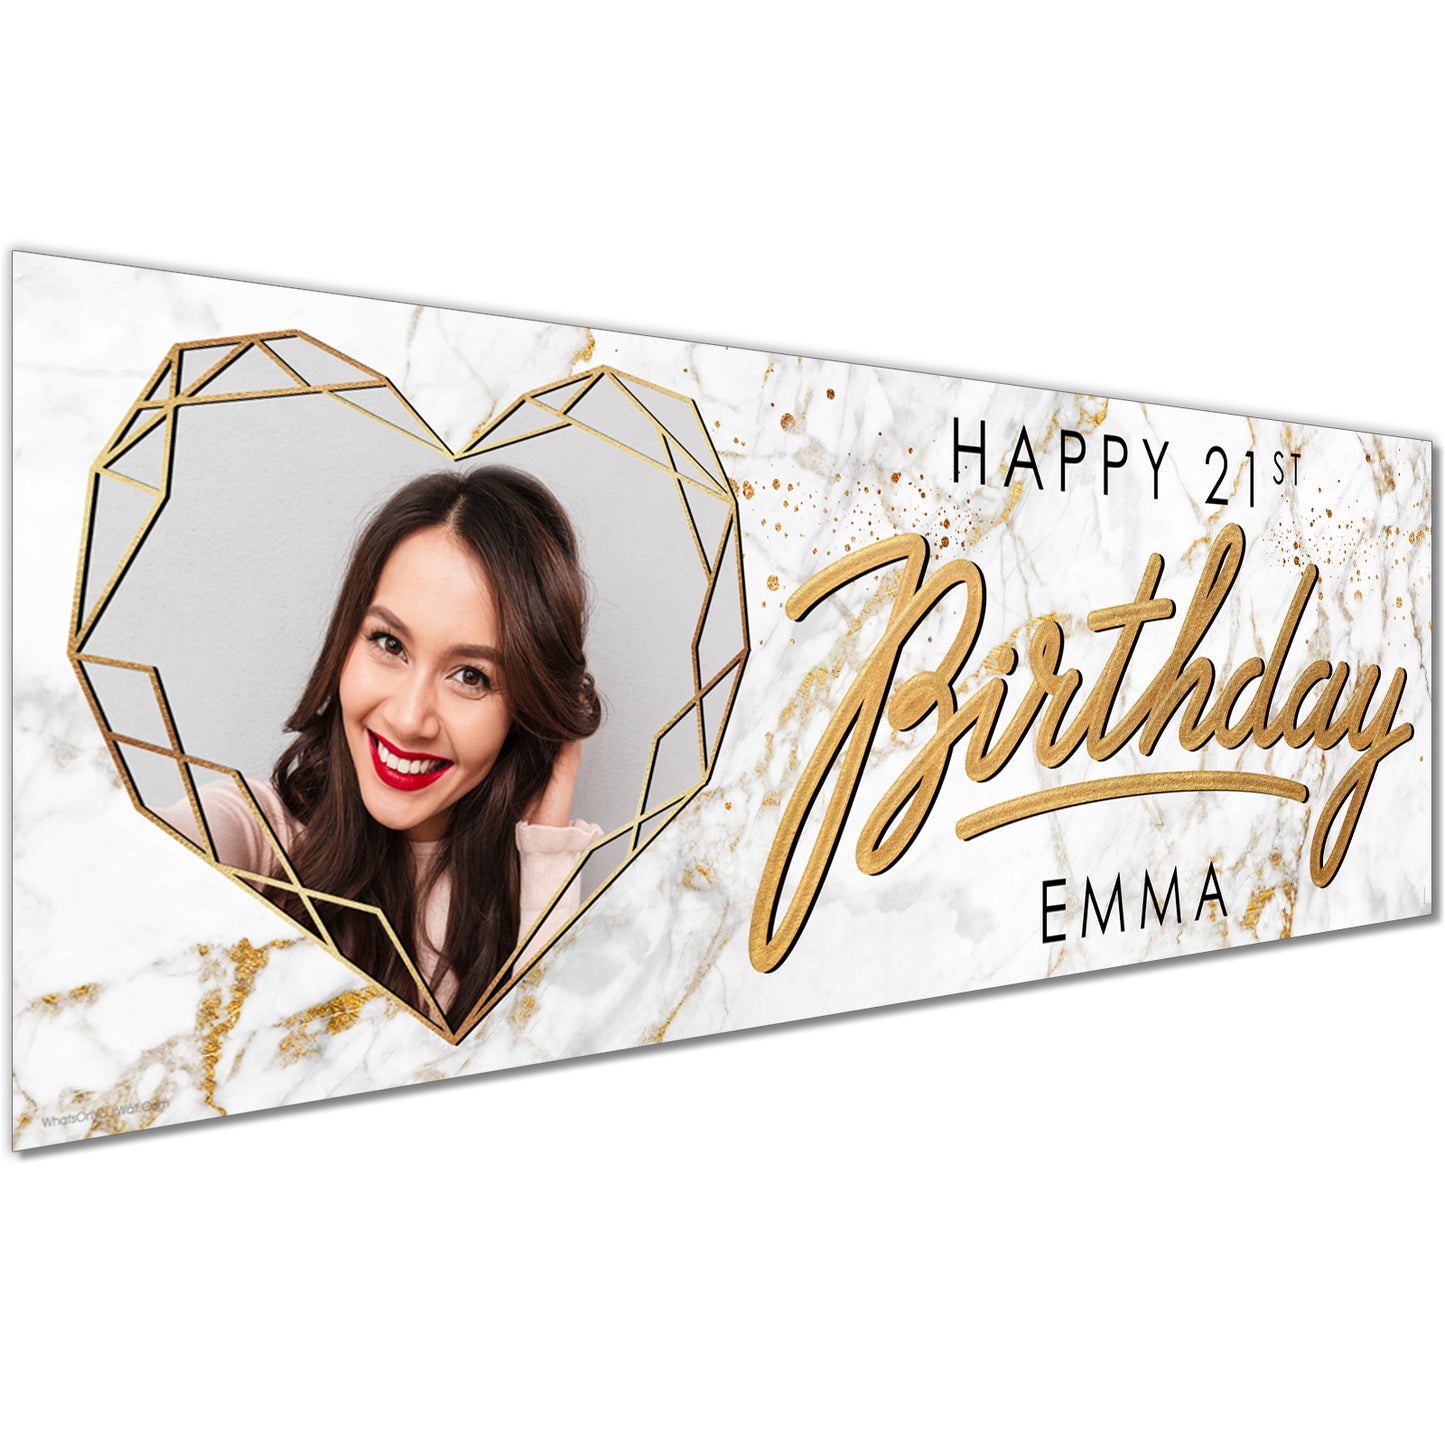 Personalised Birthday Banners in Marble Gold Heart Design